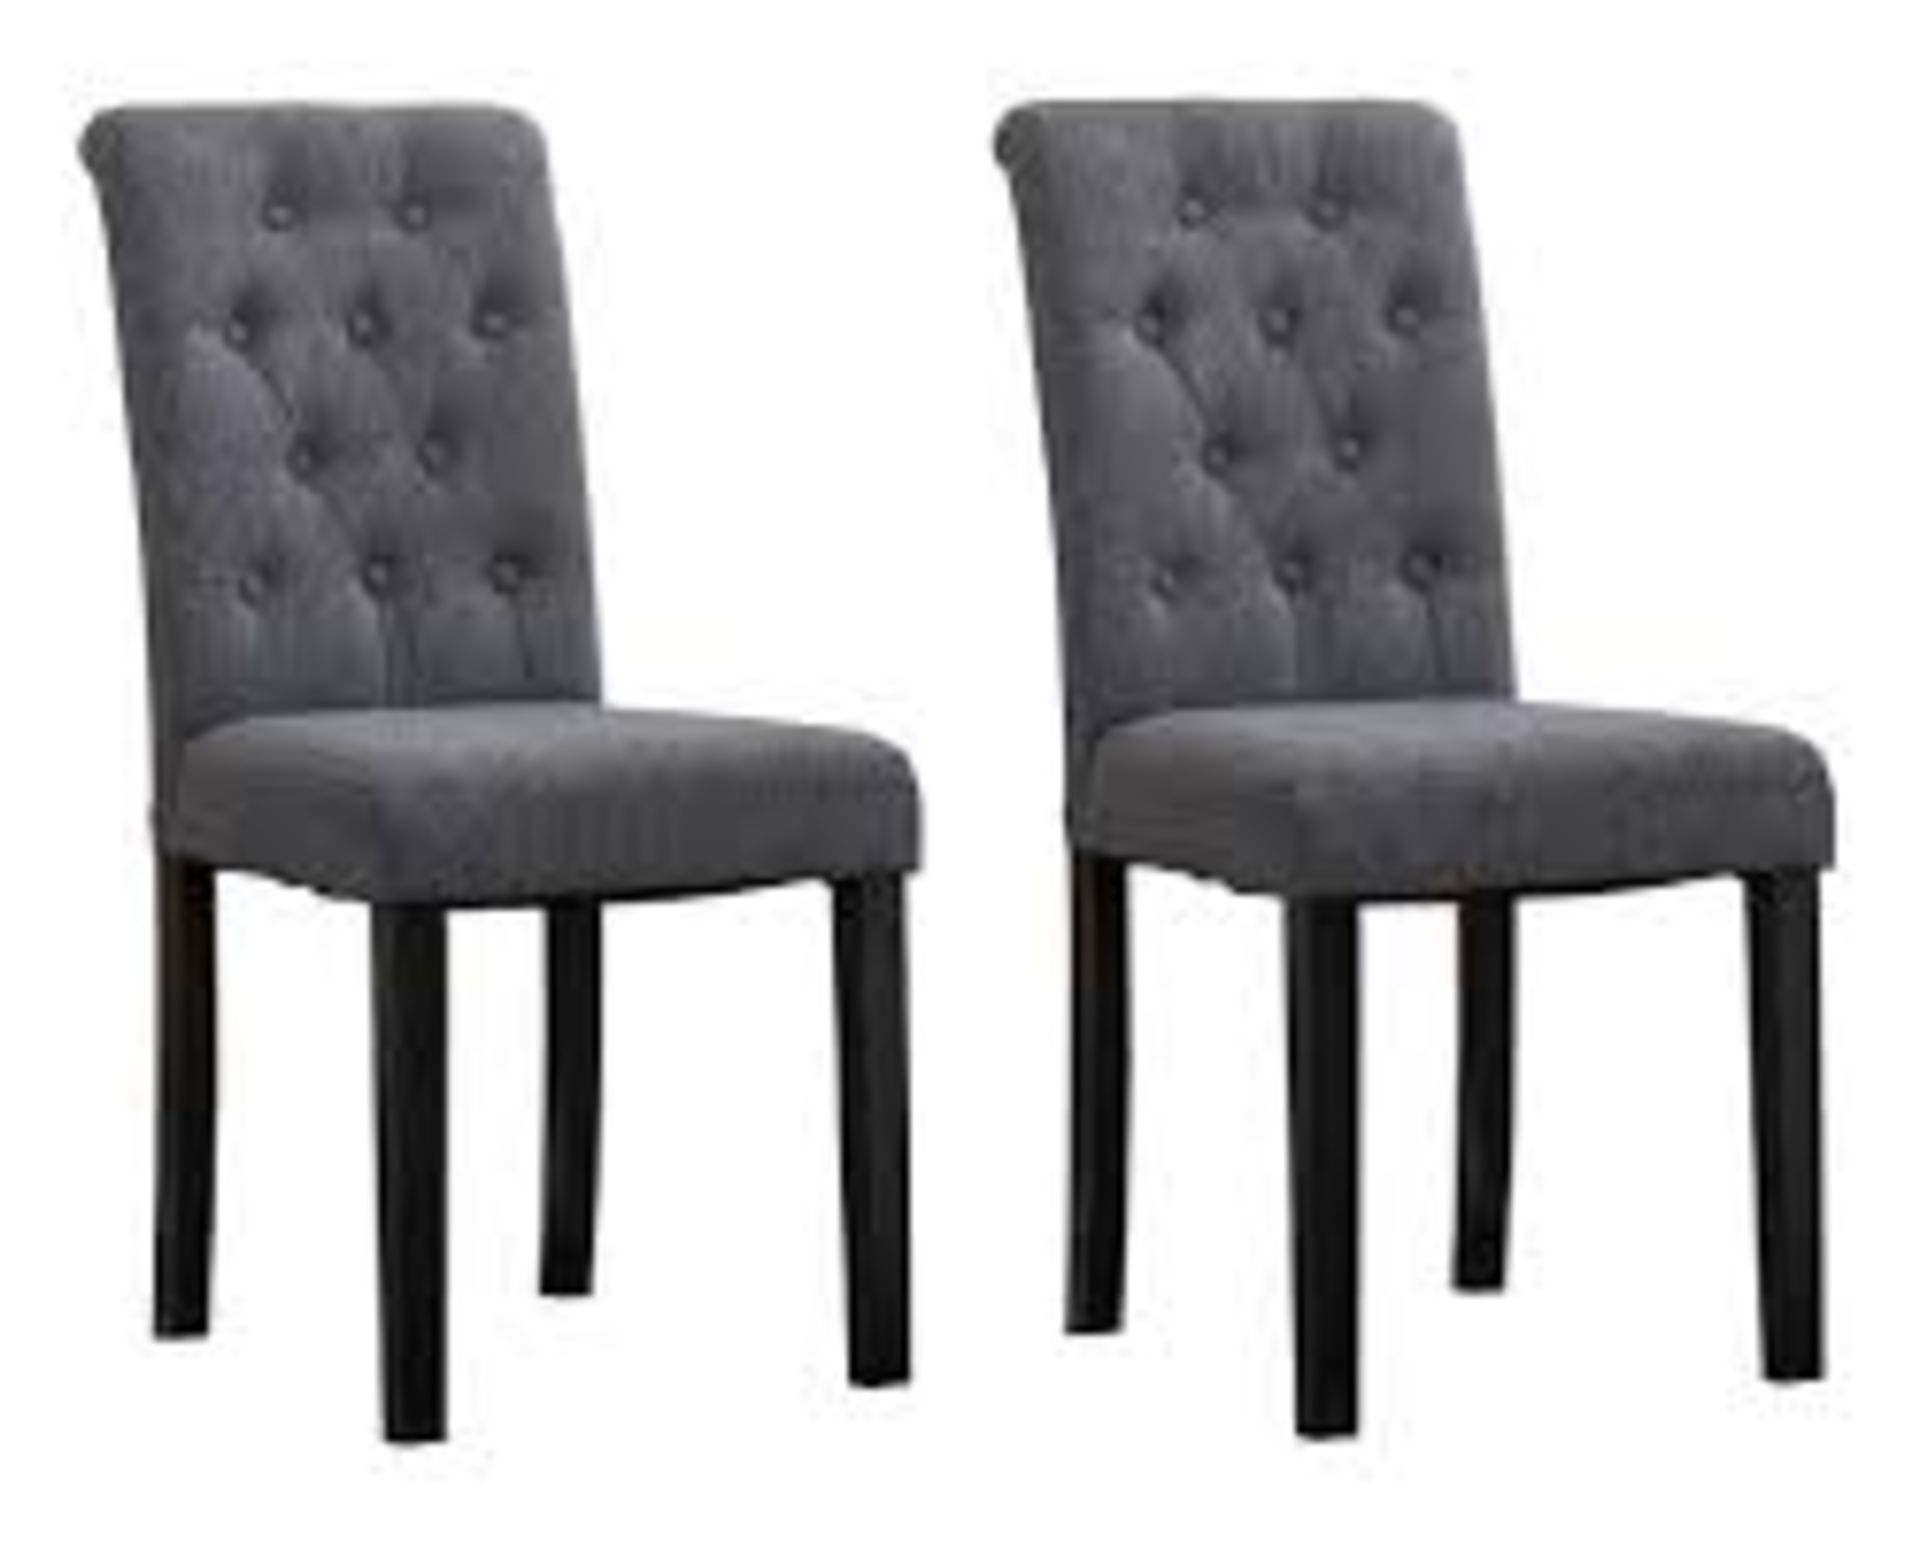 Boxed Set of 2 Grey Fabric Designer Dining Chairs RRP £120 (Public Viewing and Appraisals